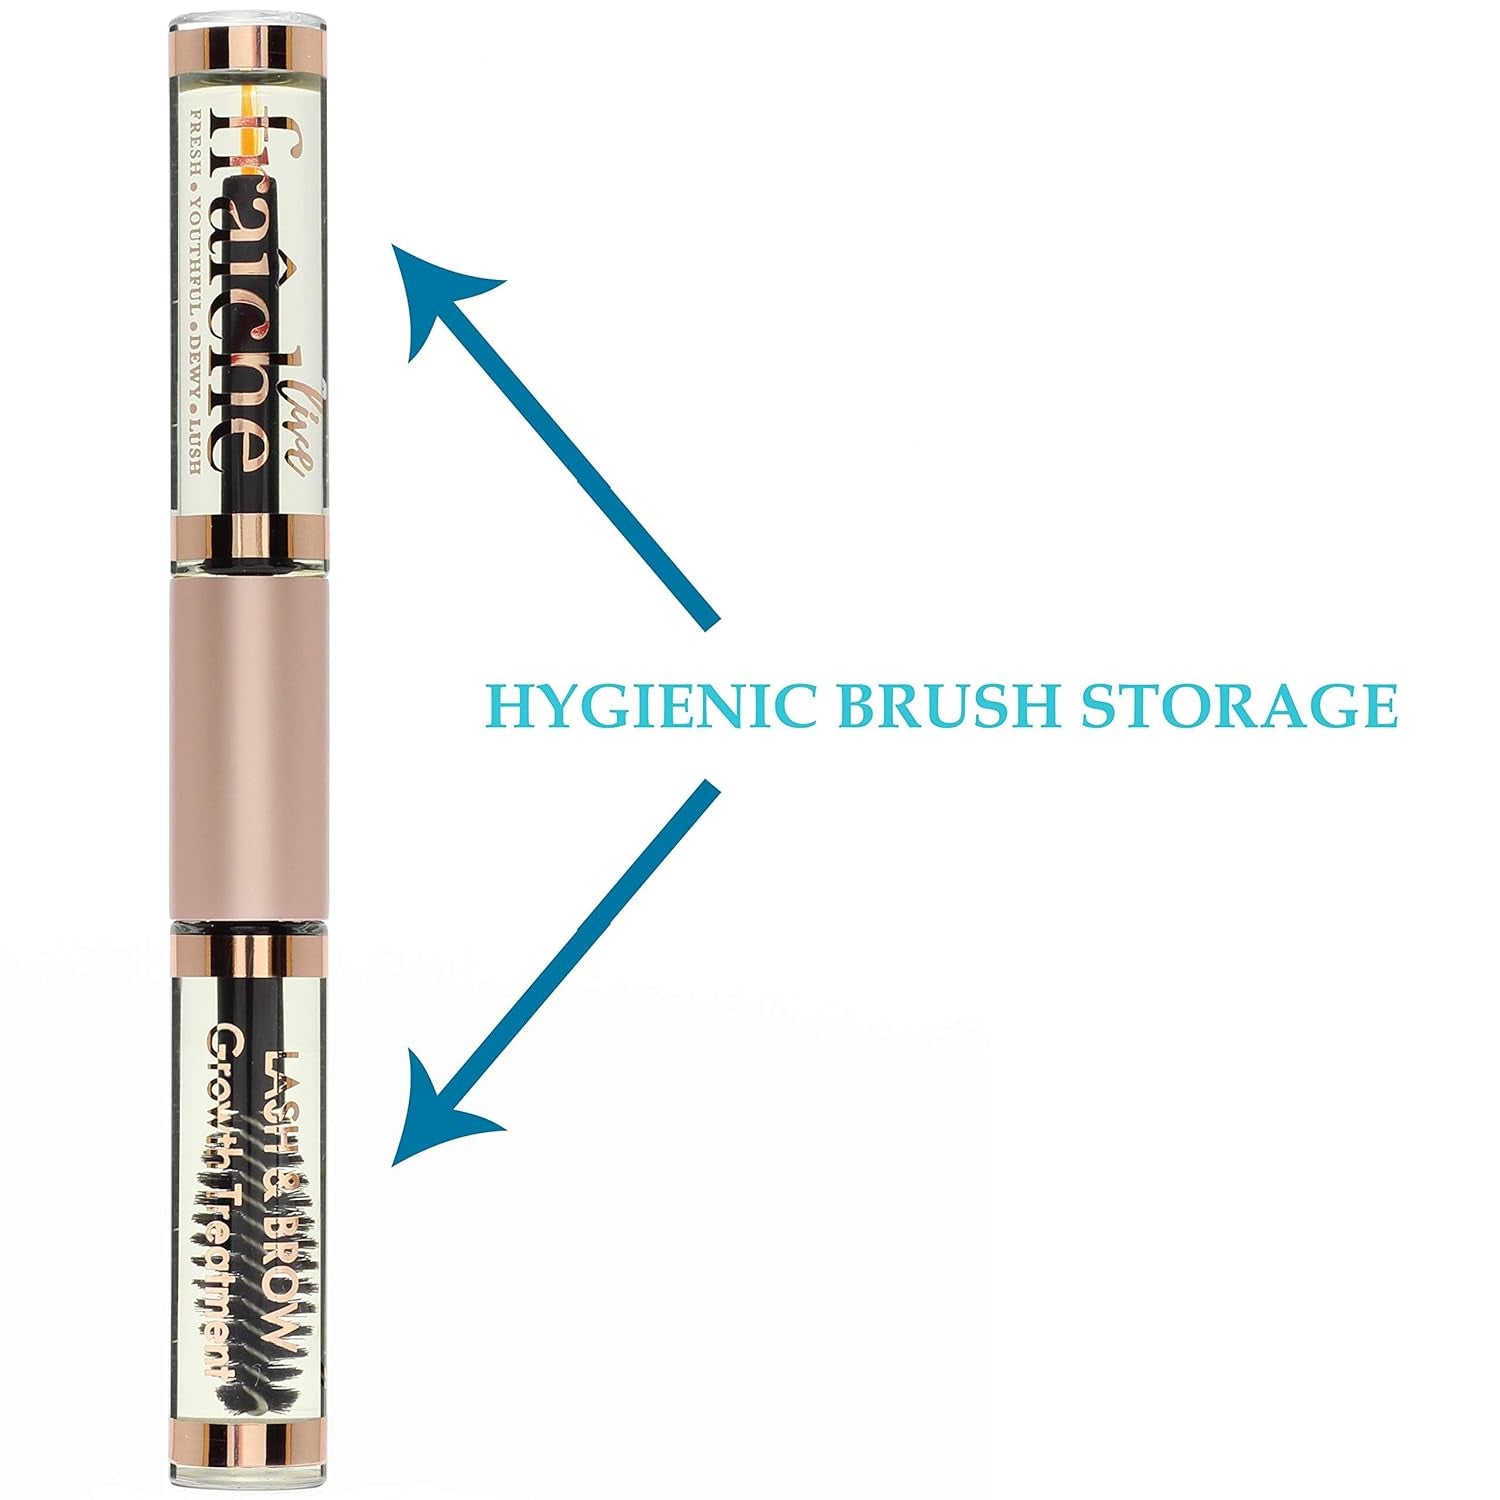 "Organic Castor Oil Lash Serum for Thicker and Fuller Lashes"